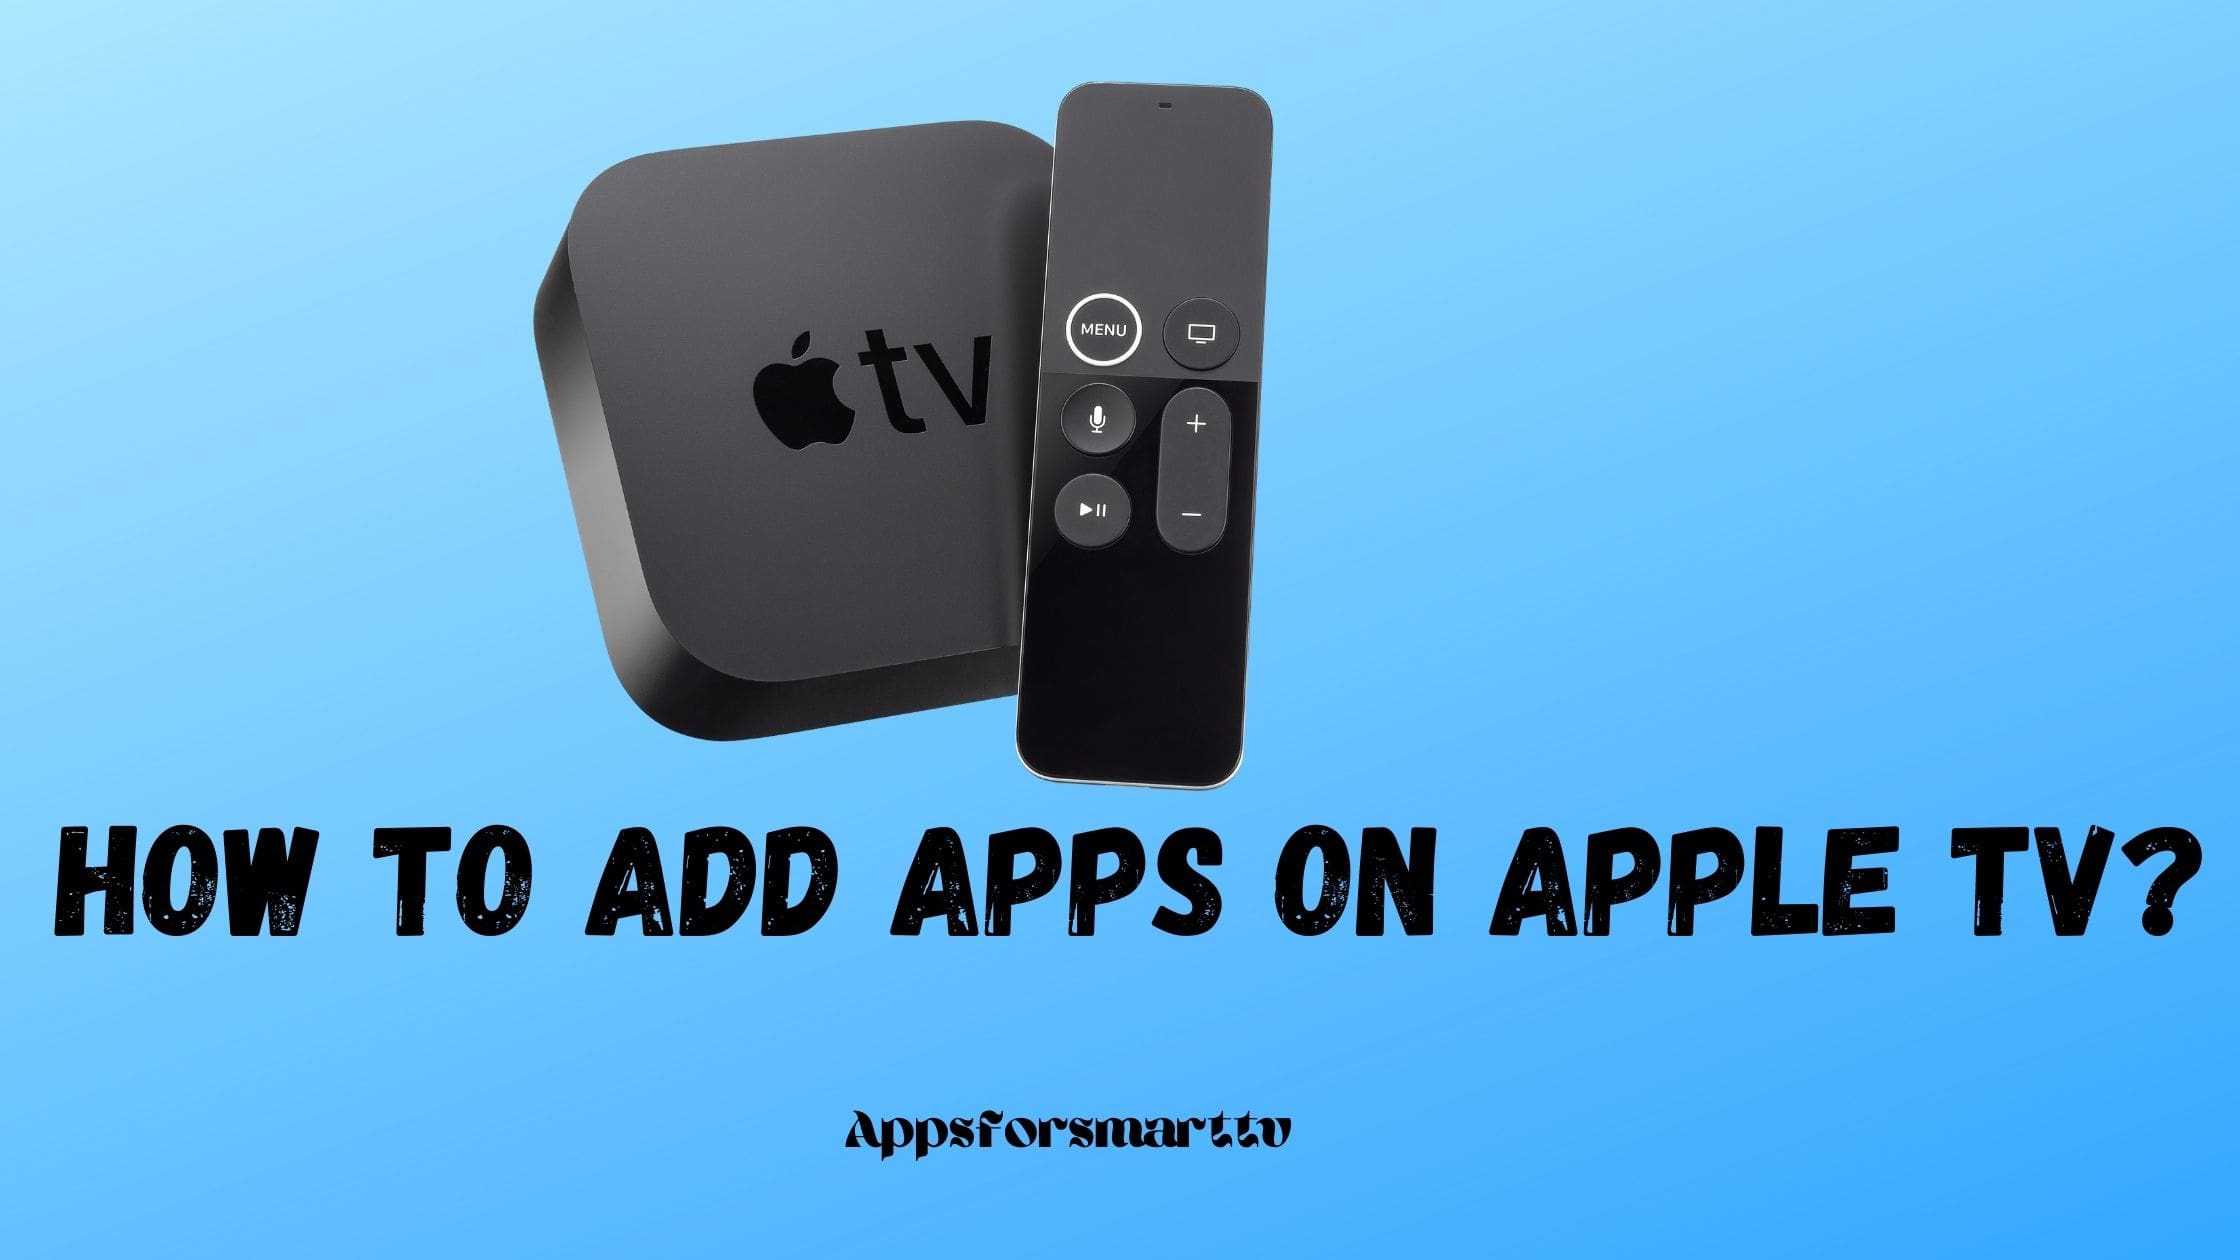 How to Add Apps on Apple TV?